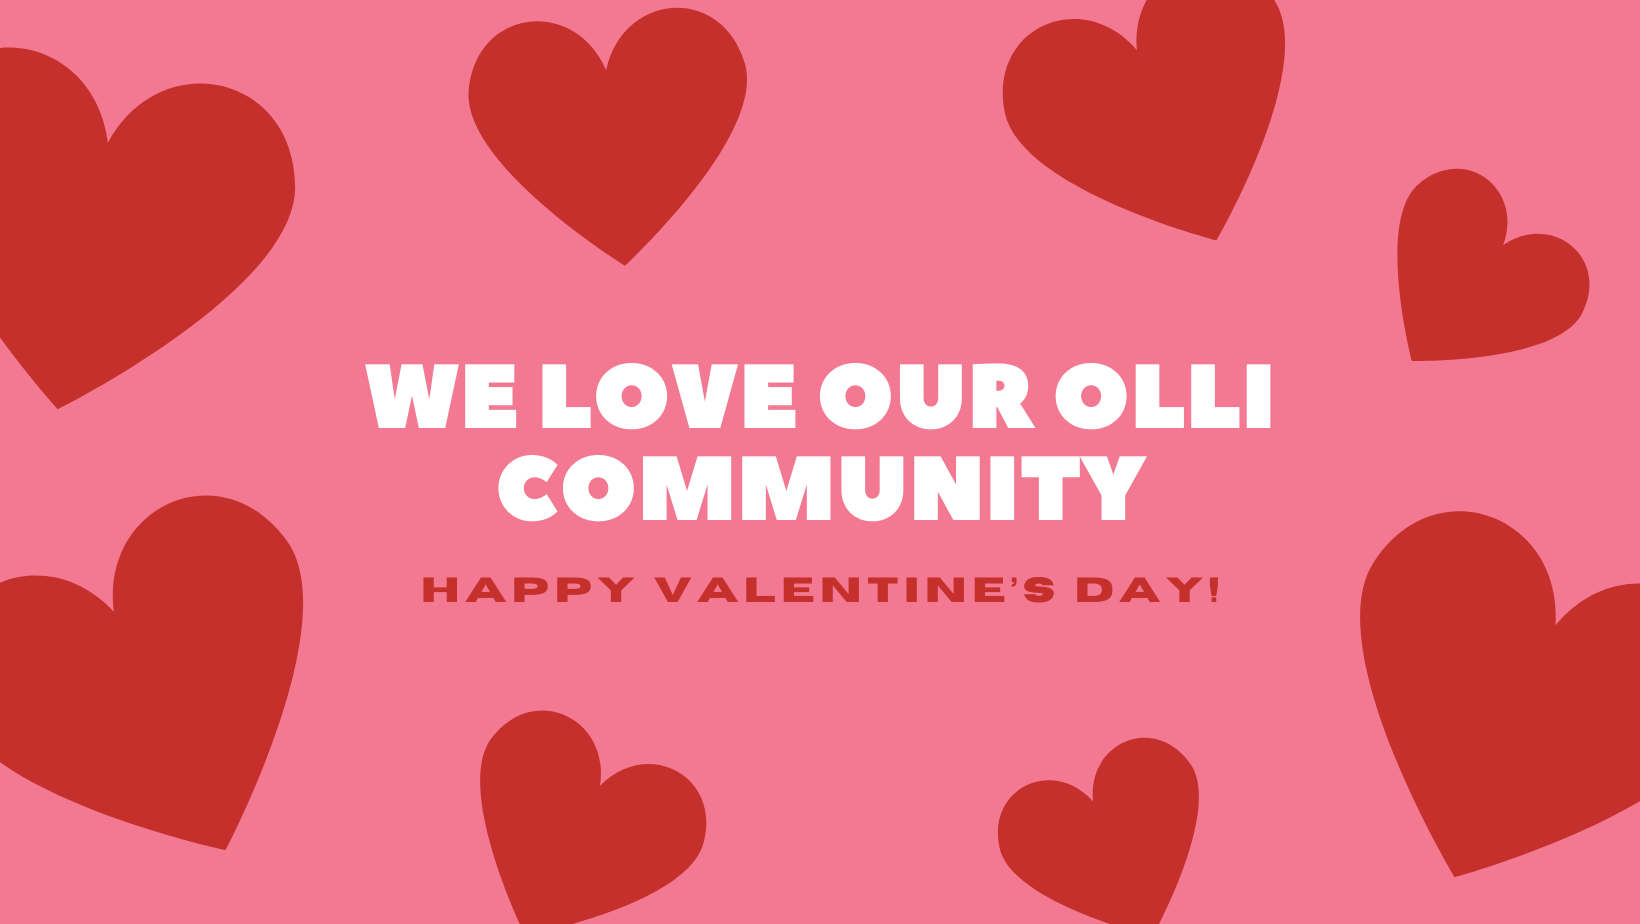 Graphic that states "We Love Our OLLI Community - Happy Valentine's Day!"